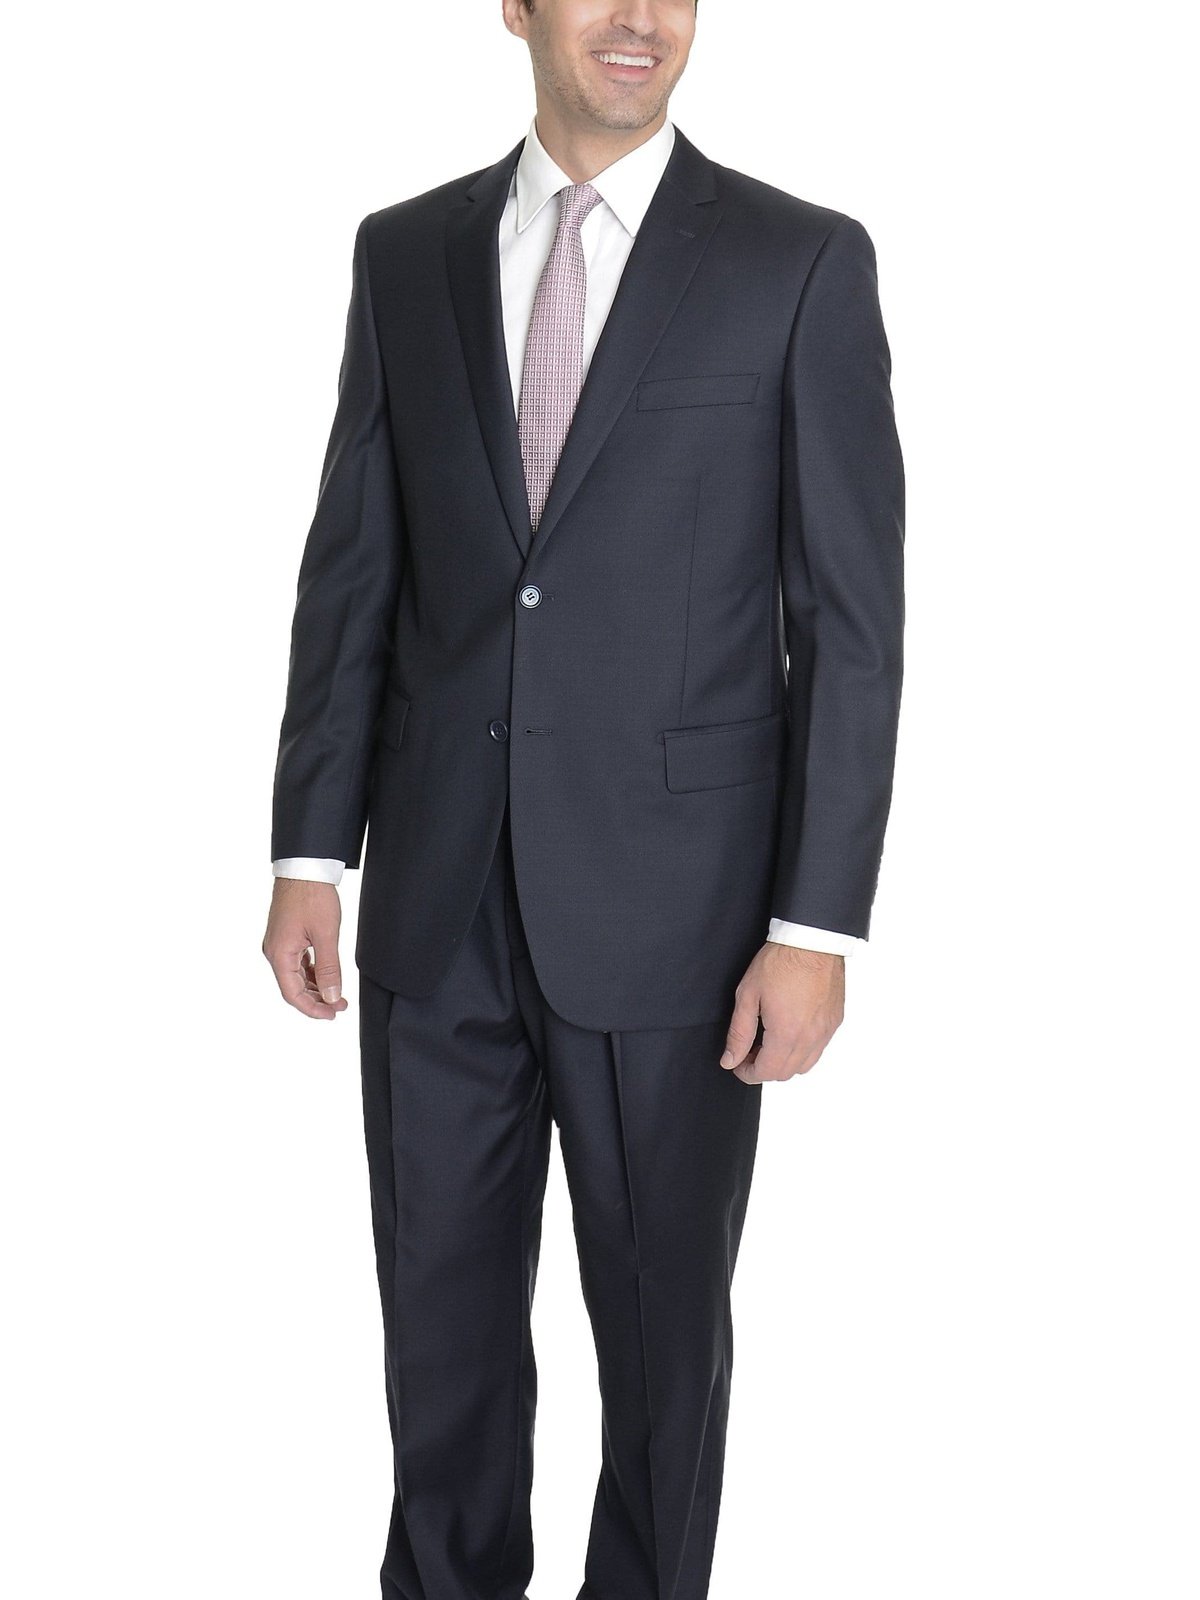 Solid Navy Blue Single Pleated Wrinkle Resistant Wool Dress Pants - The Suit Depot